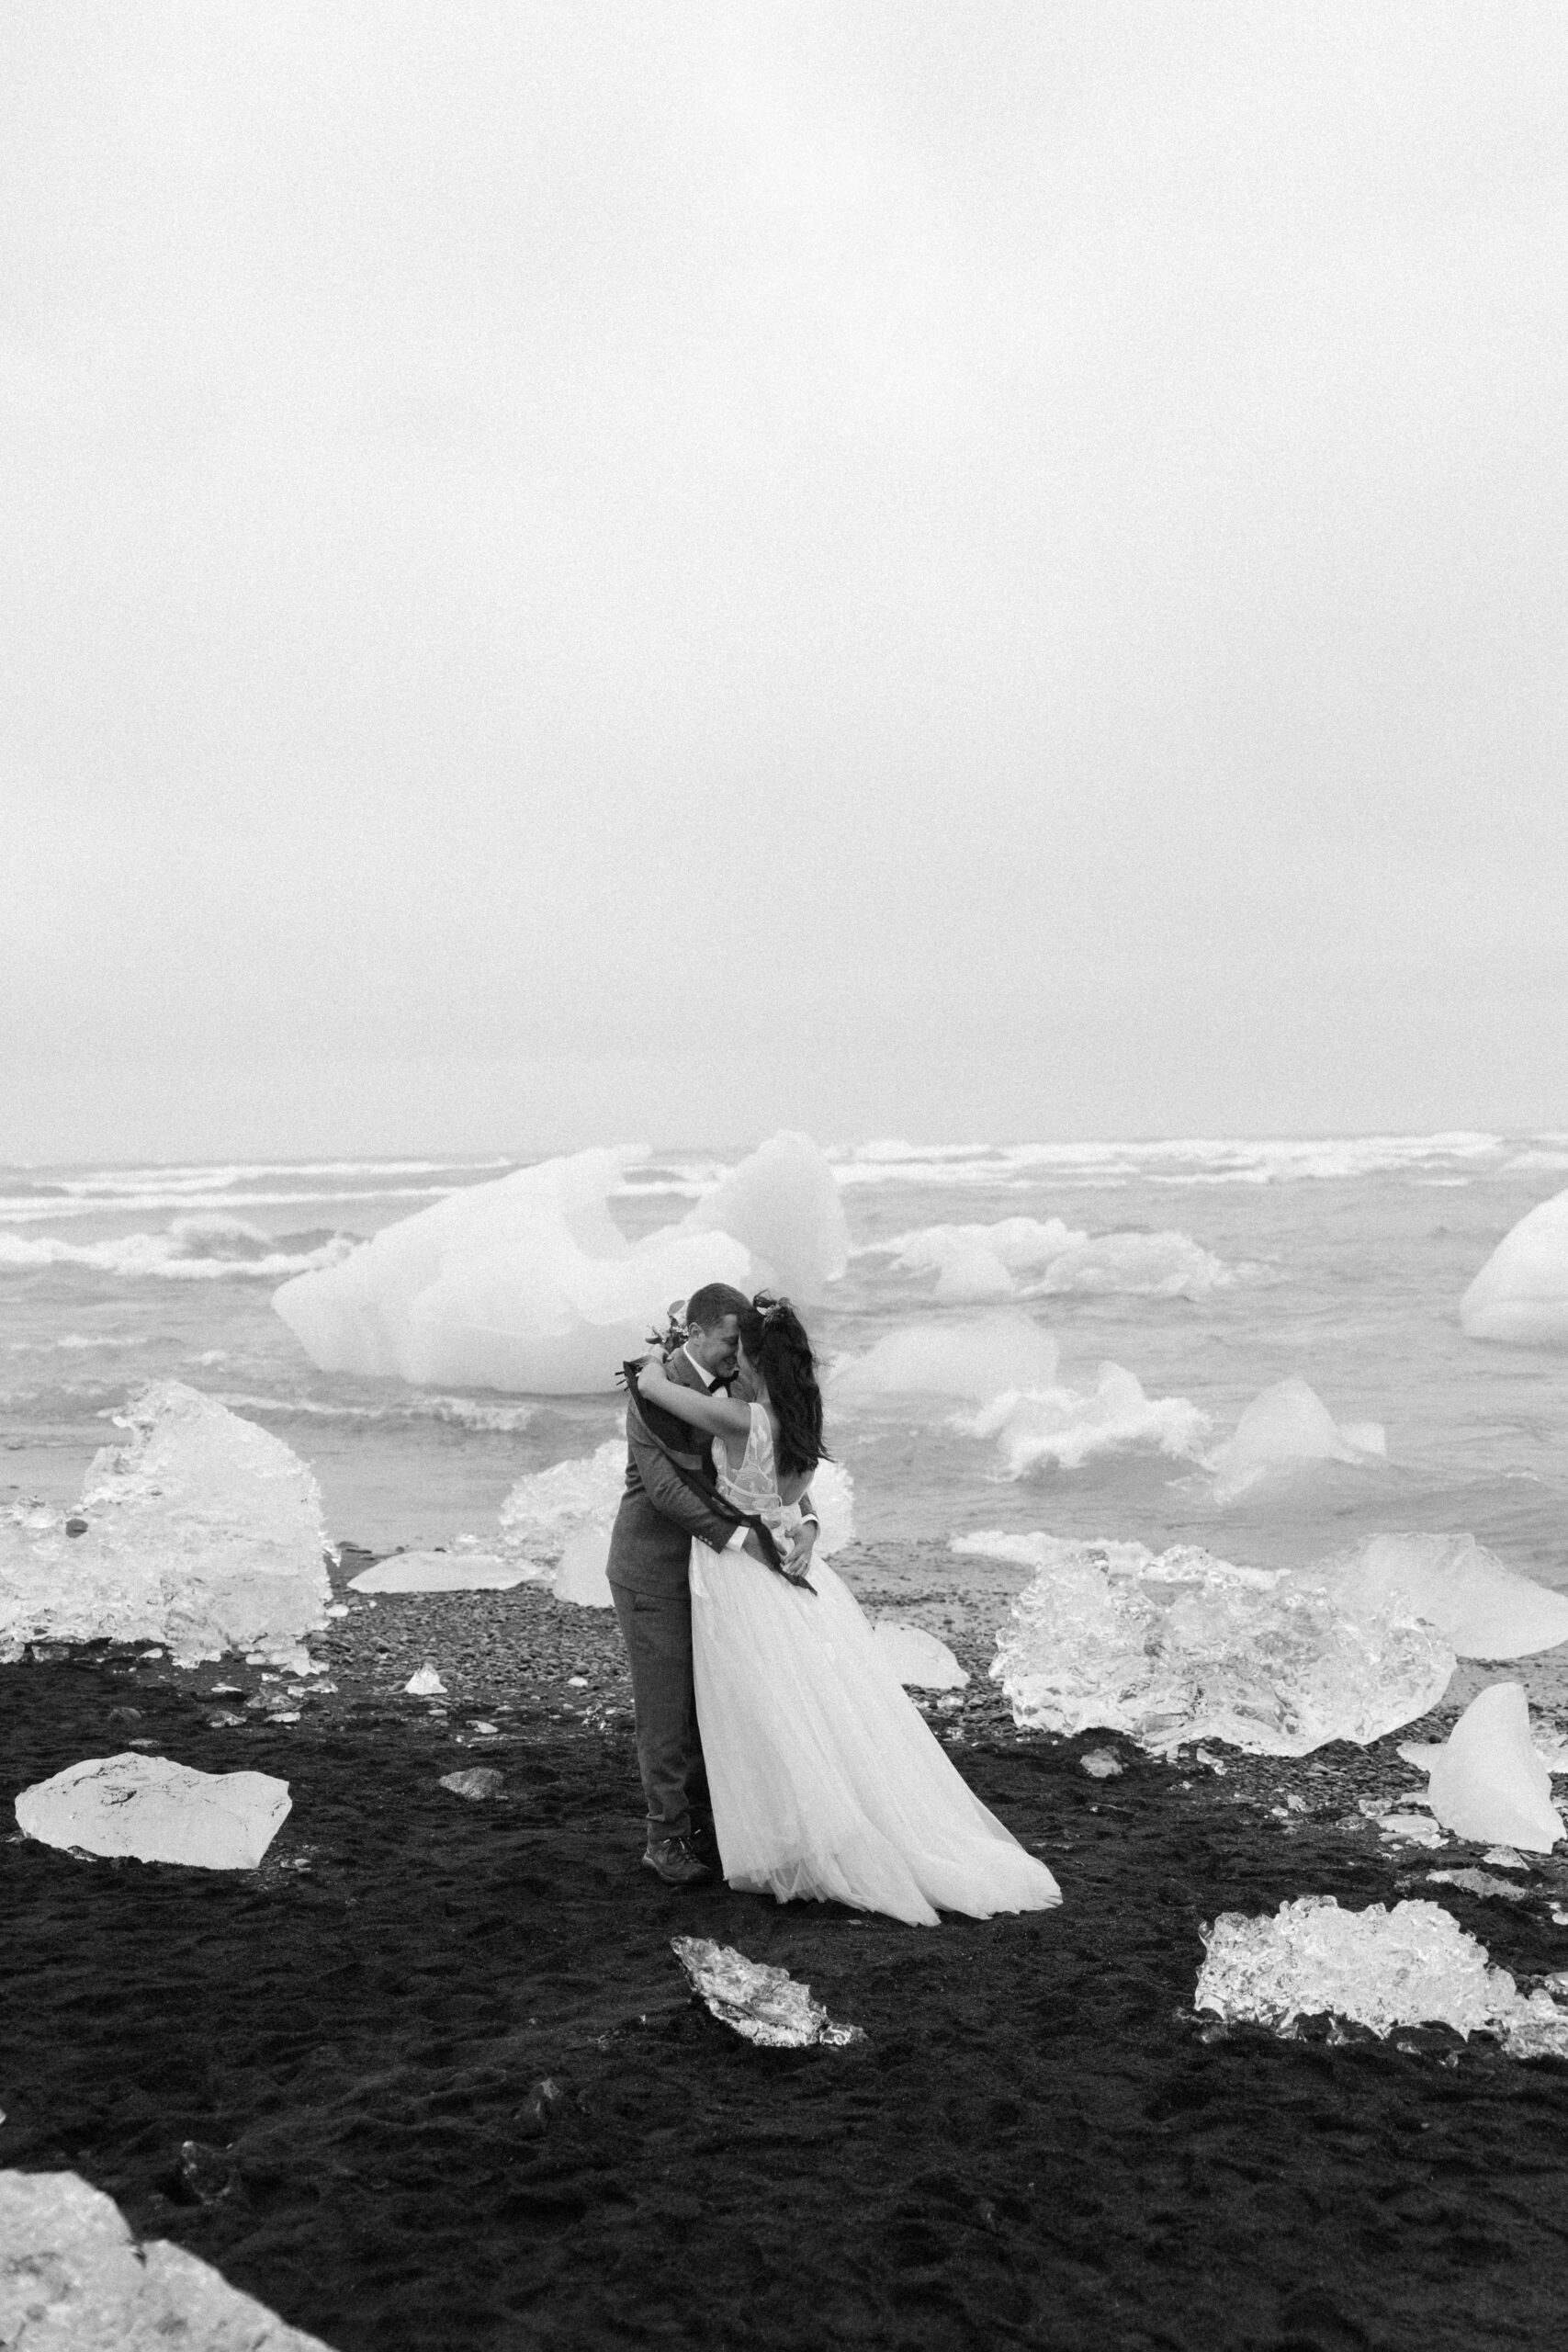 How To Elope In Iceland: The Ultimate Elopement Guide